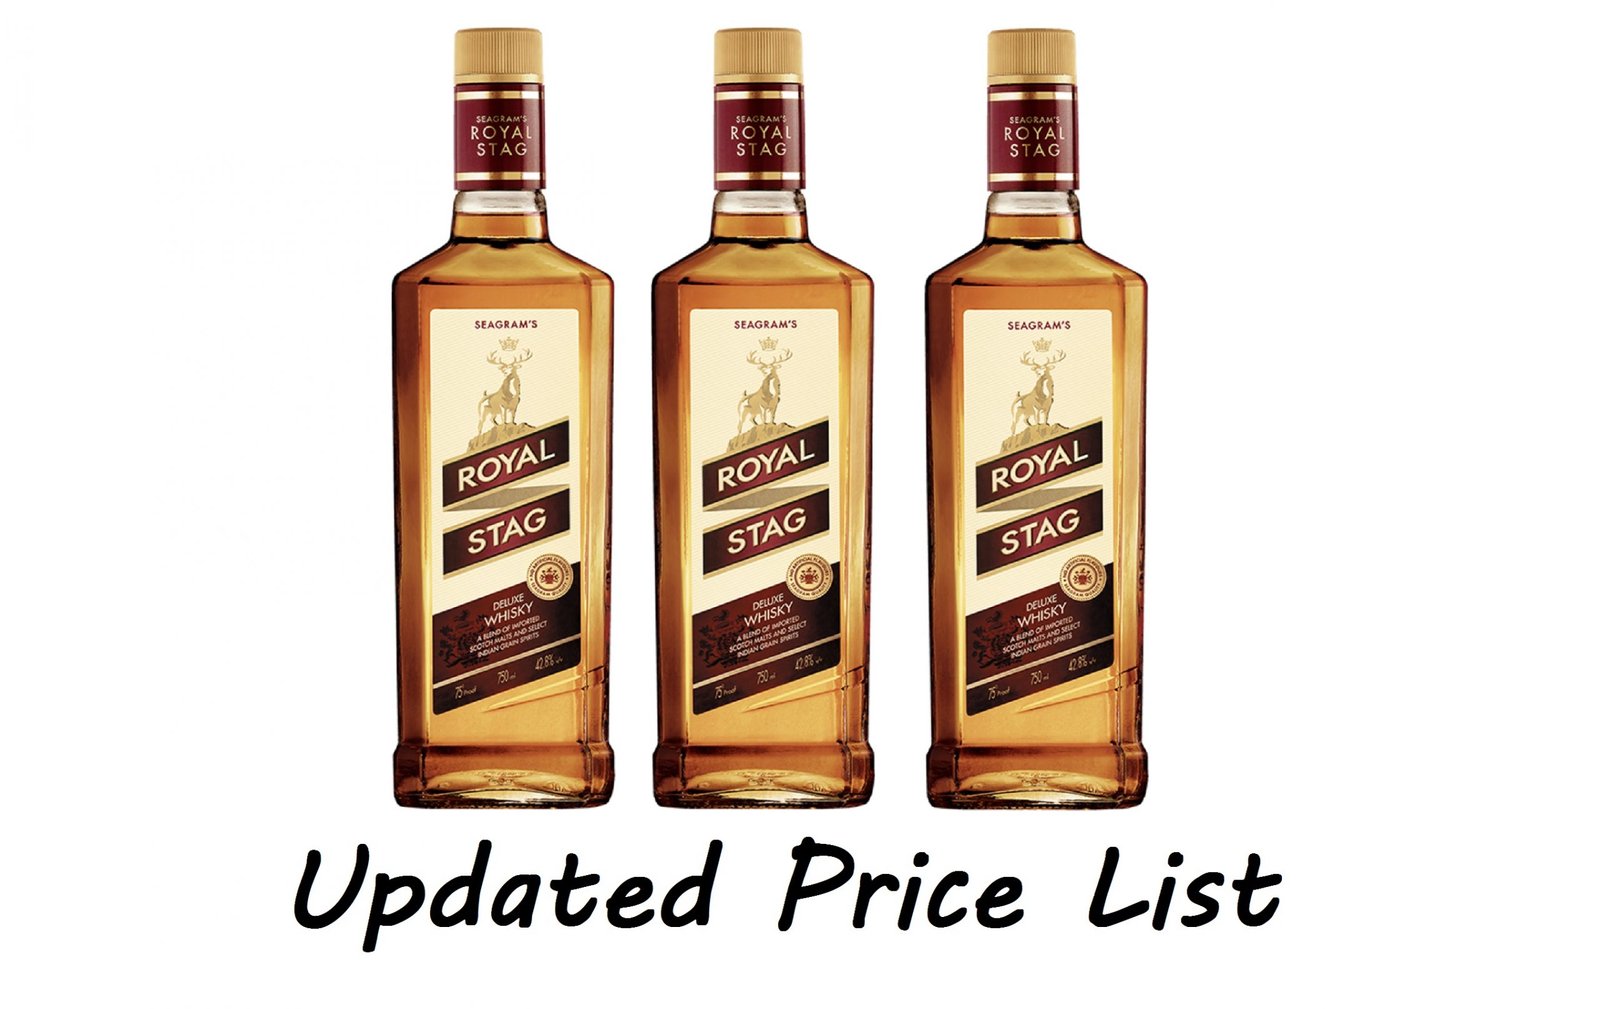 Royal Stag Price in India